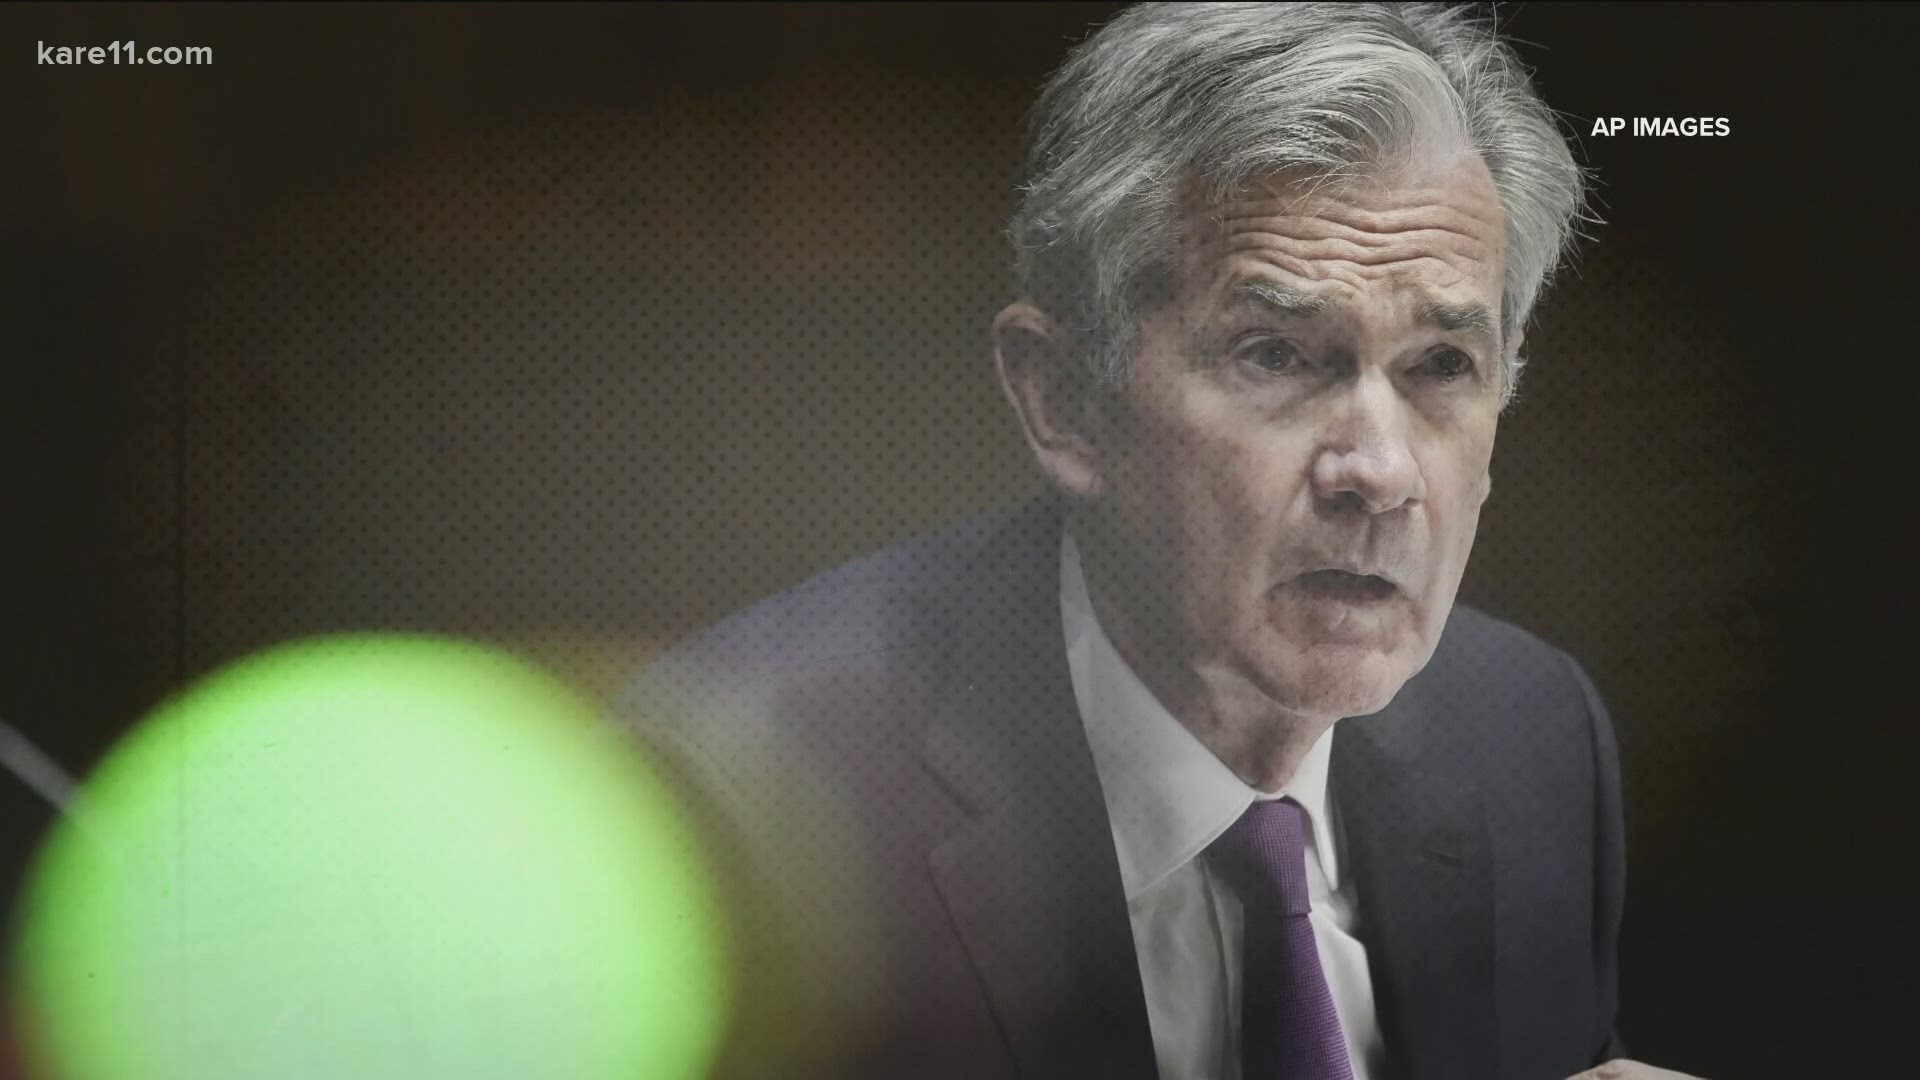 Pres. Trump suddenly pulled the plug on another COVID stimulus bill after the chairman of the federal reserve made his case for another urgent round of relief.